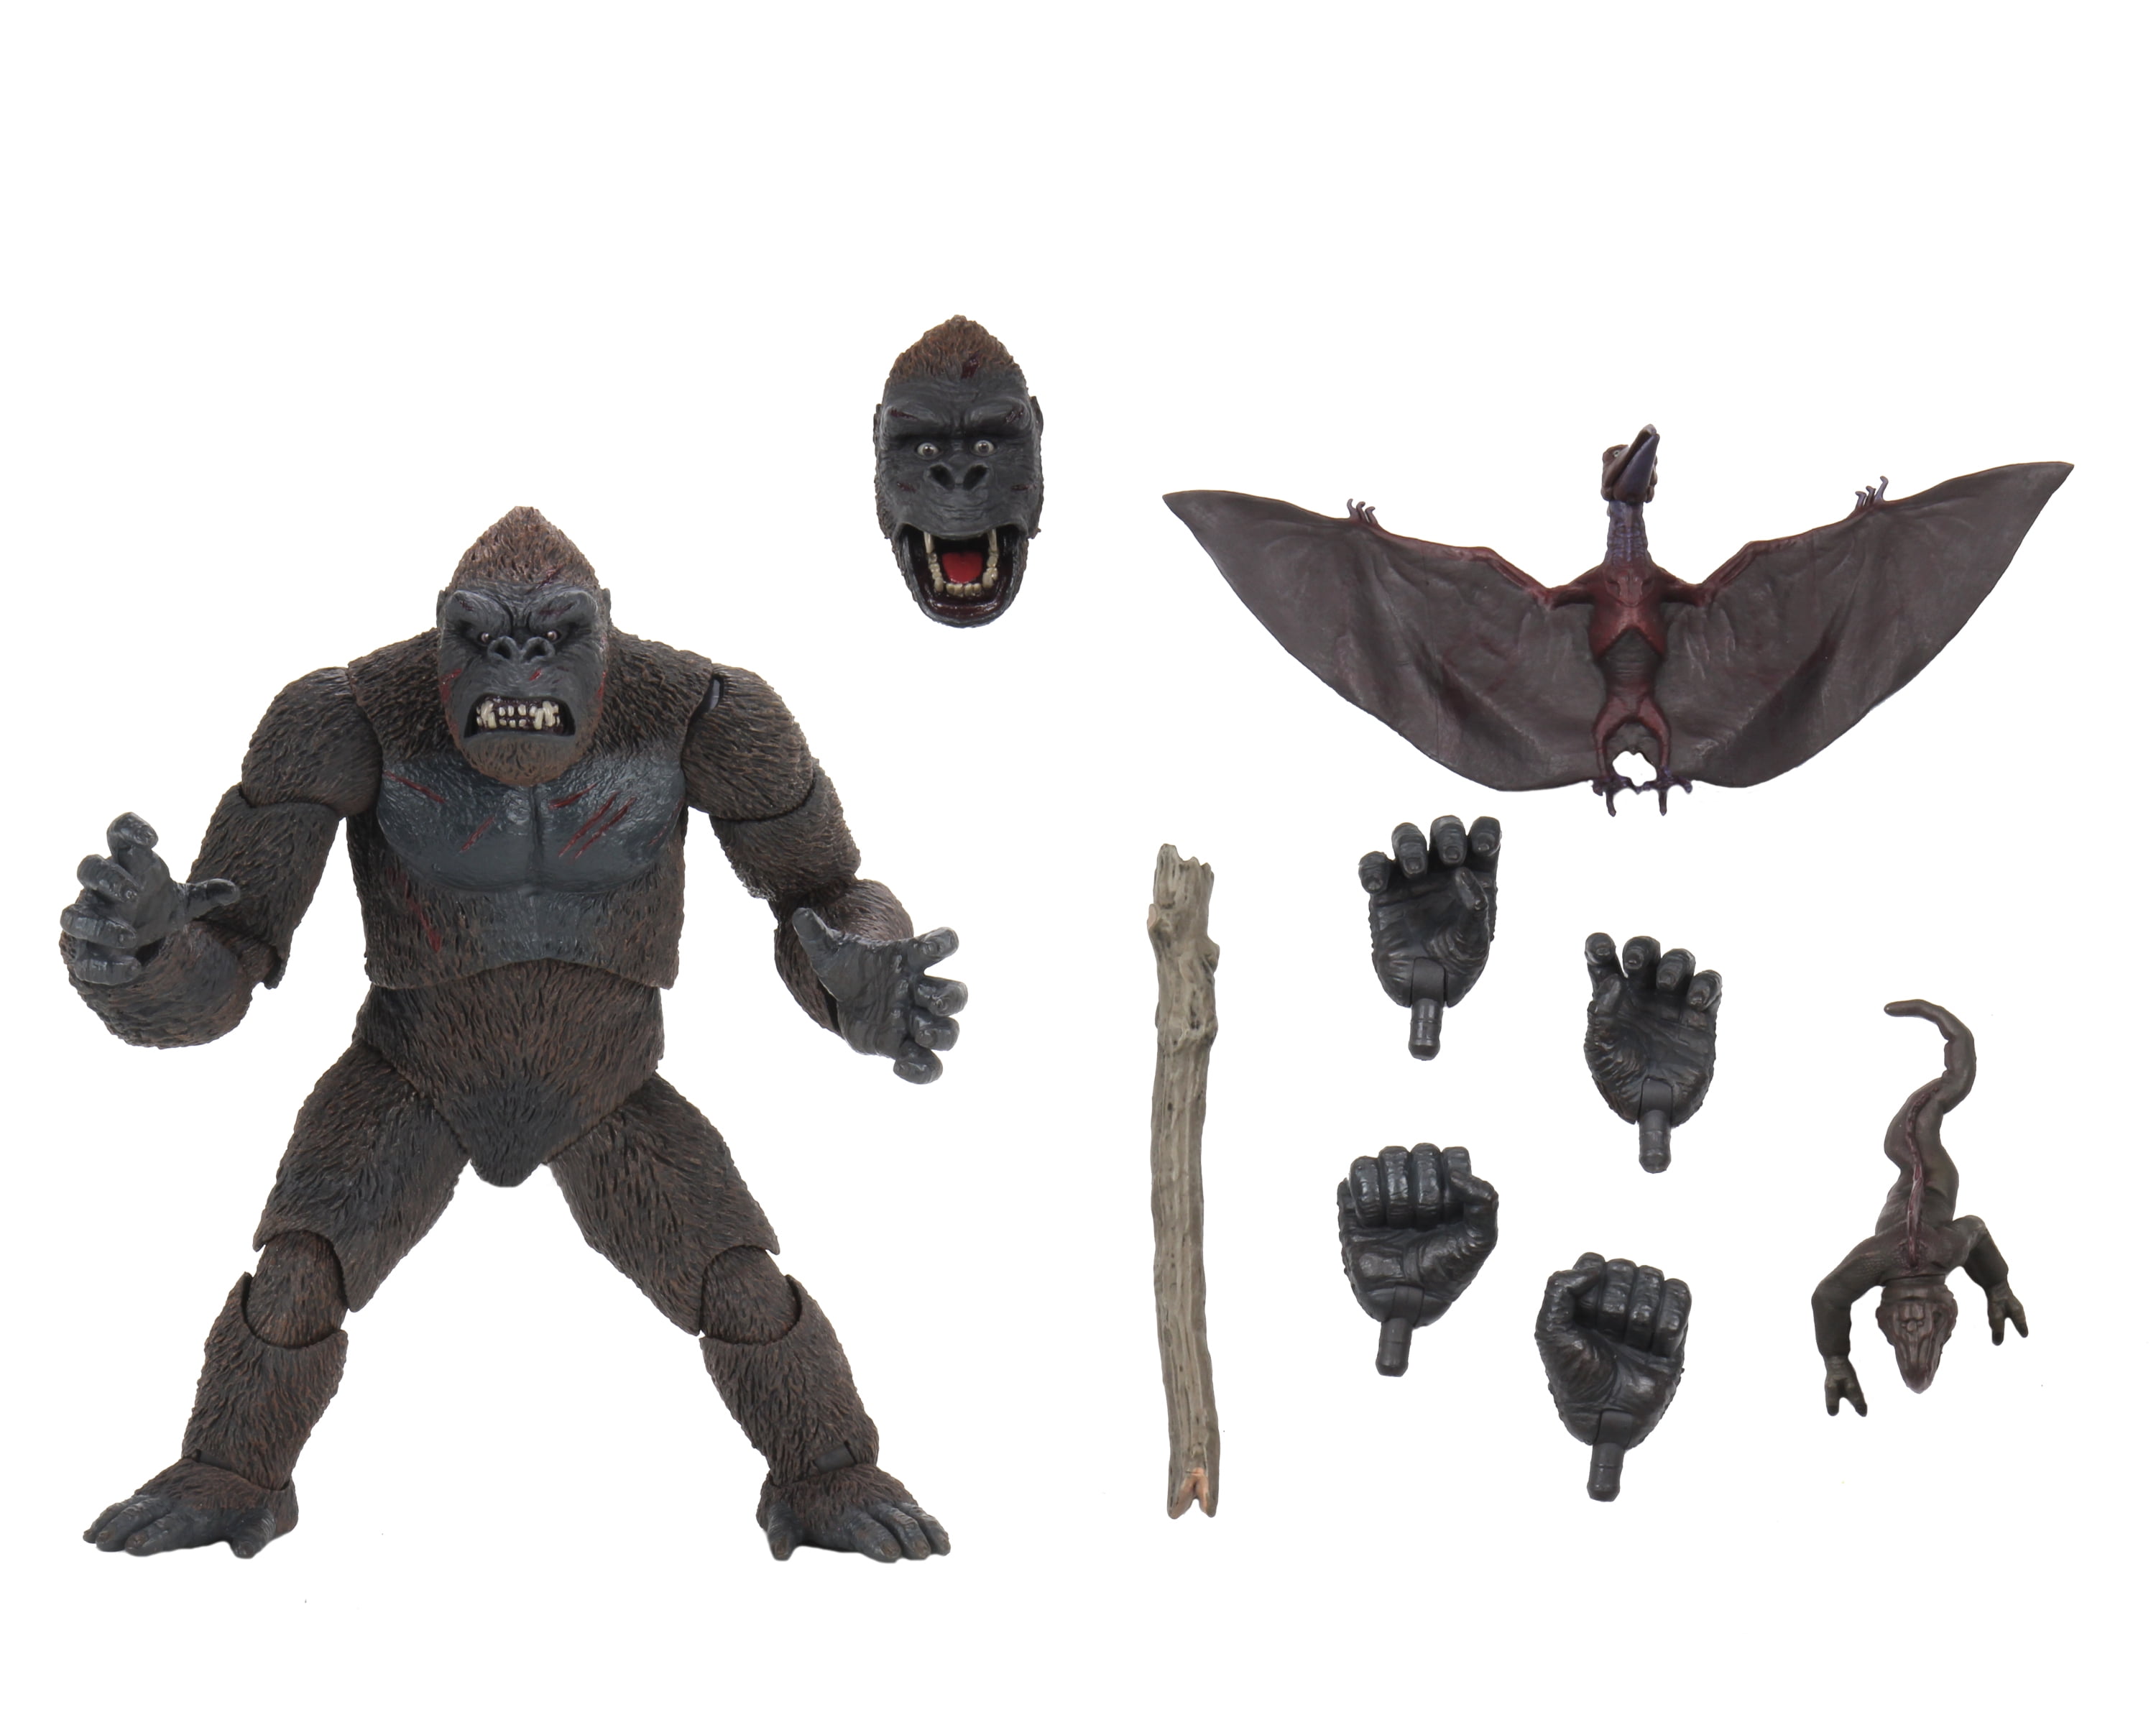 Kong Skull Island Action Figure Playmates Toys 6 Inch for sale online 